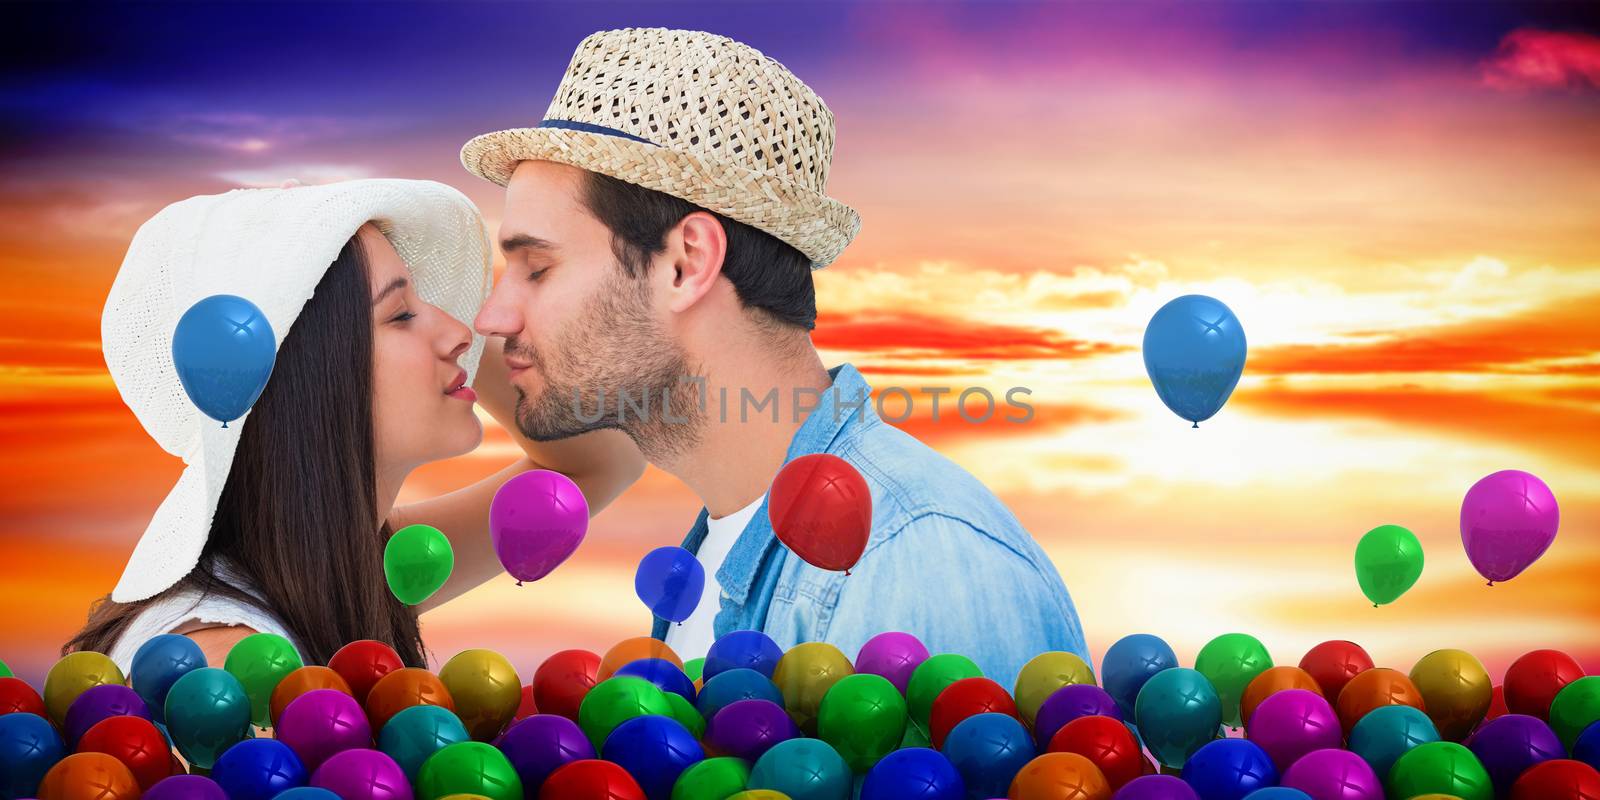 Happy hipster couple about to kiss against purple sky with orange clouds